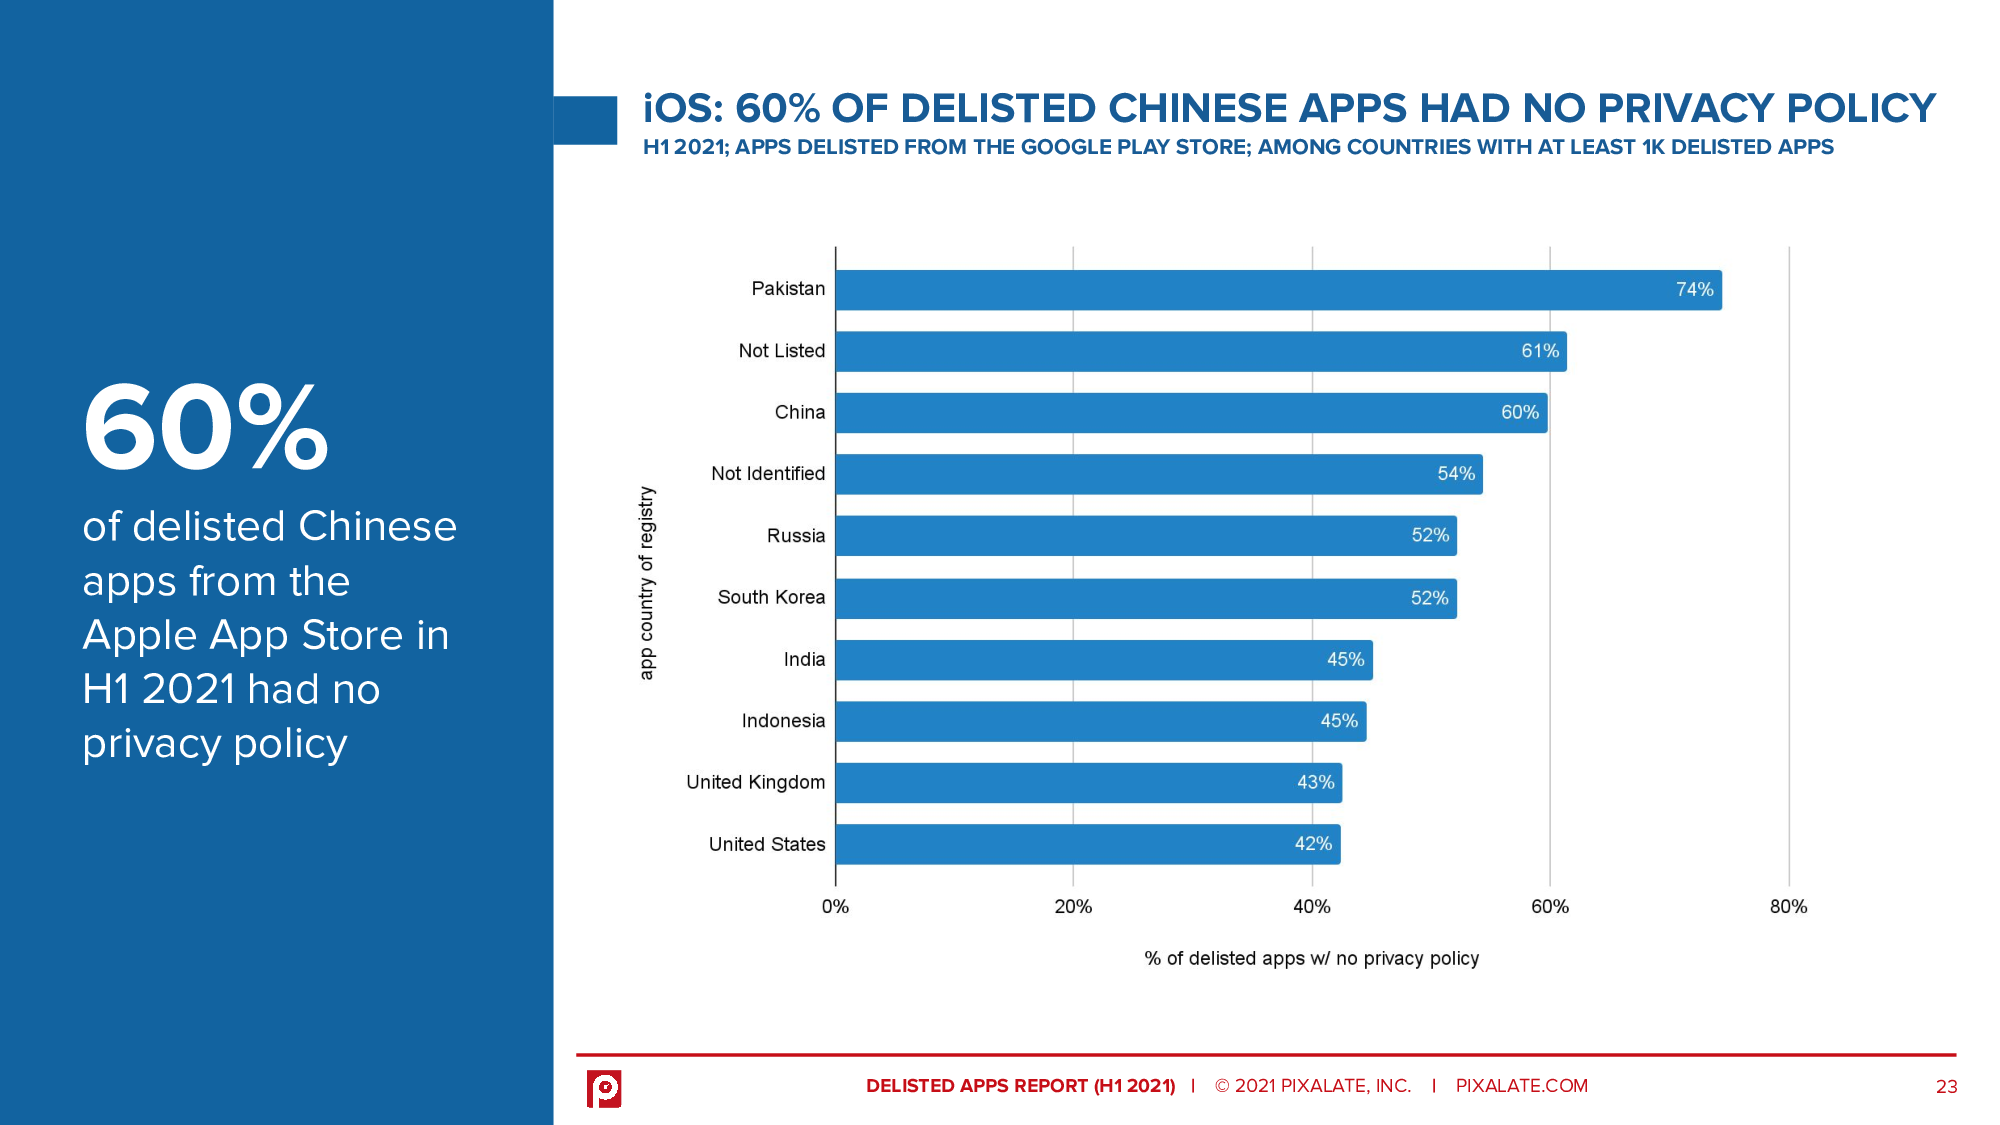 60% of delisted Chinese apps from the Apple App Store in H1 2021 had no privacy policy